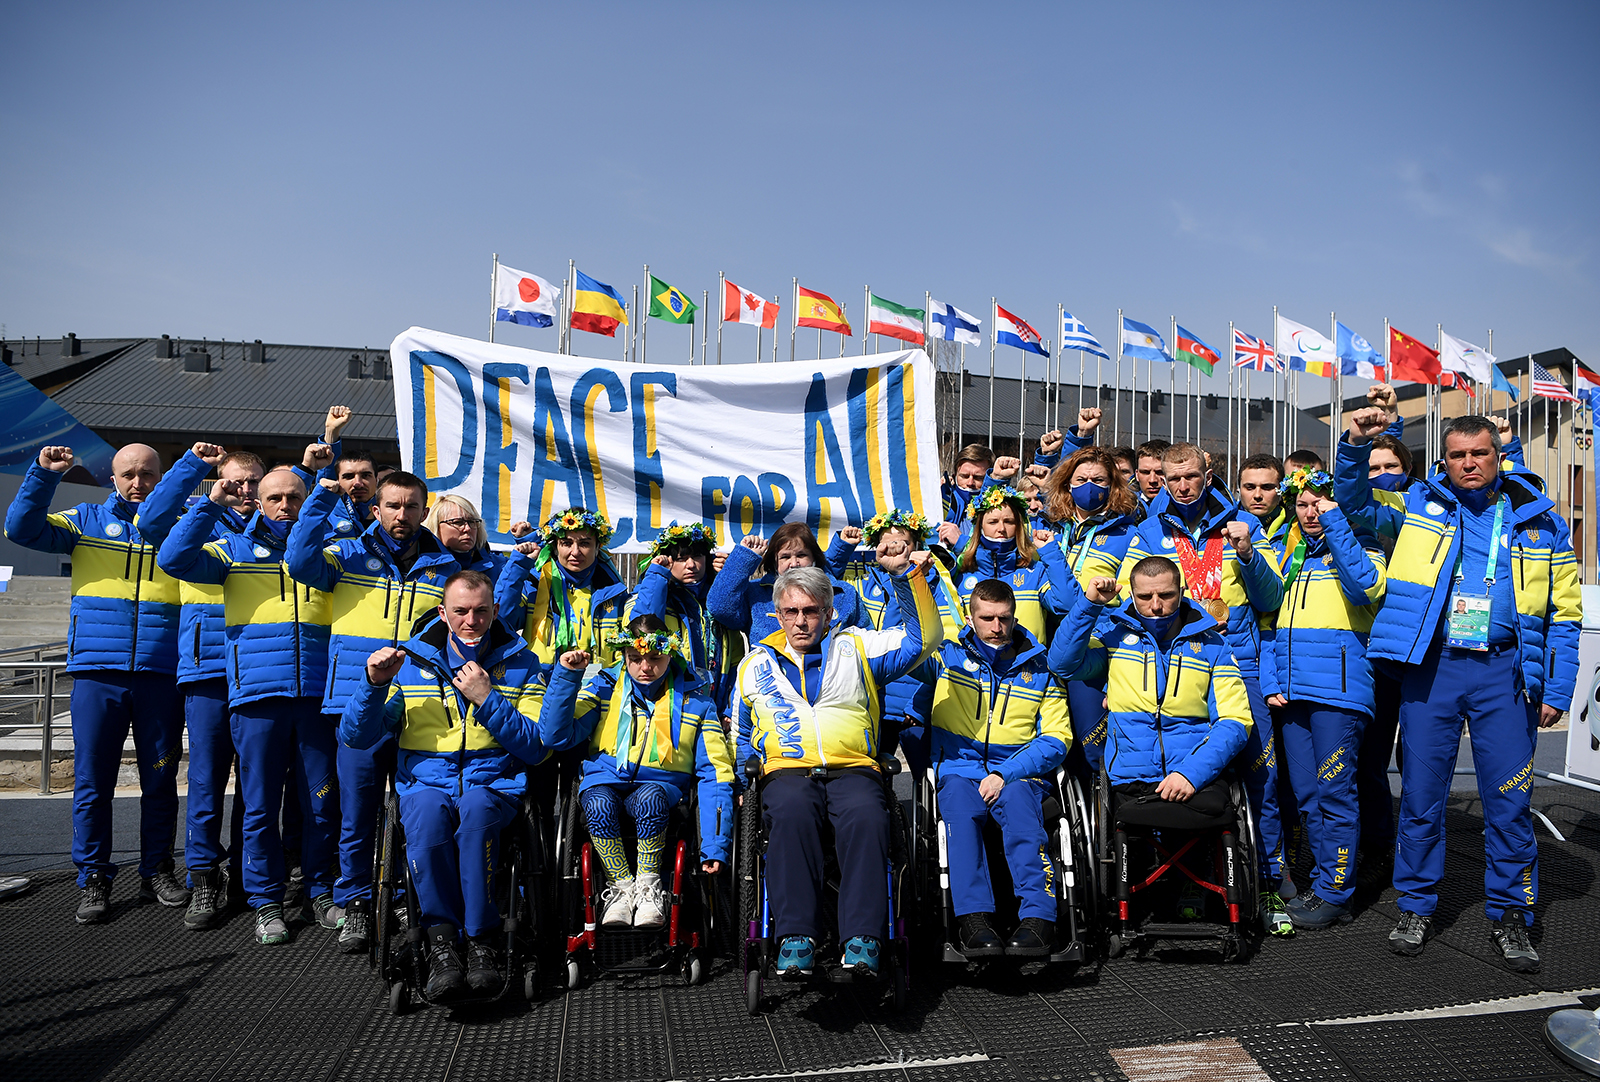 Ukrainian paralympic committee president Valerii Sushkevych and members of Team Ukraine hold a banner up reading 'Peace for All' in the athletes village during day six of the Beijing 2022 Winter Paralympics on March 10 in Zhangjiakou, China. 